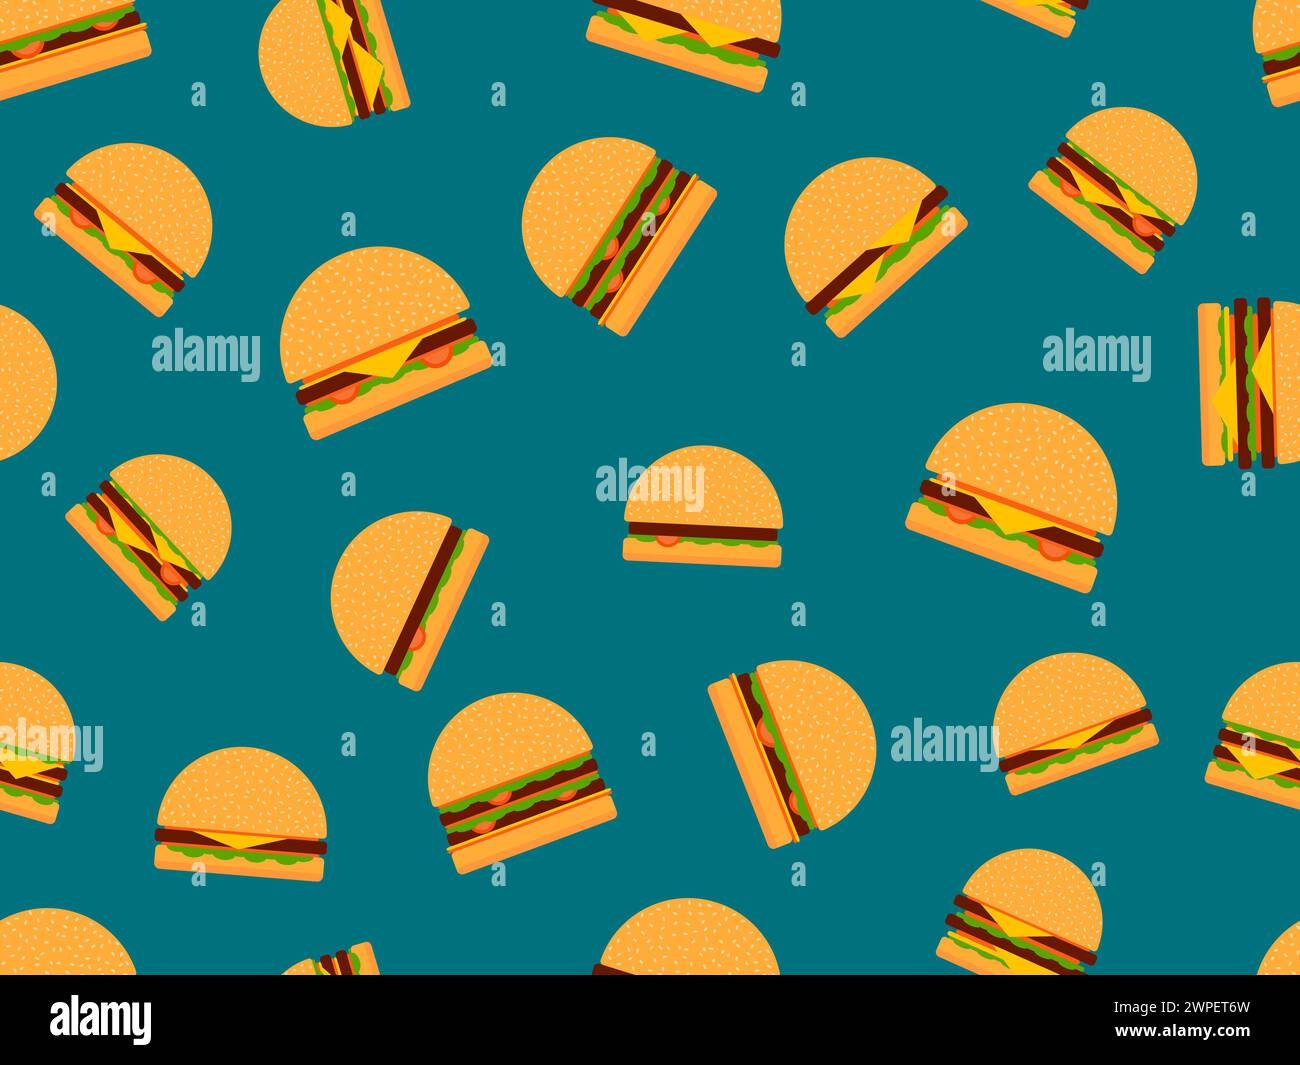 Hamburgers seamless pattern. Cheeseburgers and hamburgers in flat style. Cheeseburger with two cutlets. Bun with sesame seeds, cutlet, cheese and sauc Stock Vector